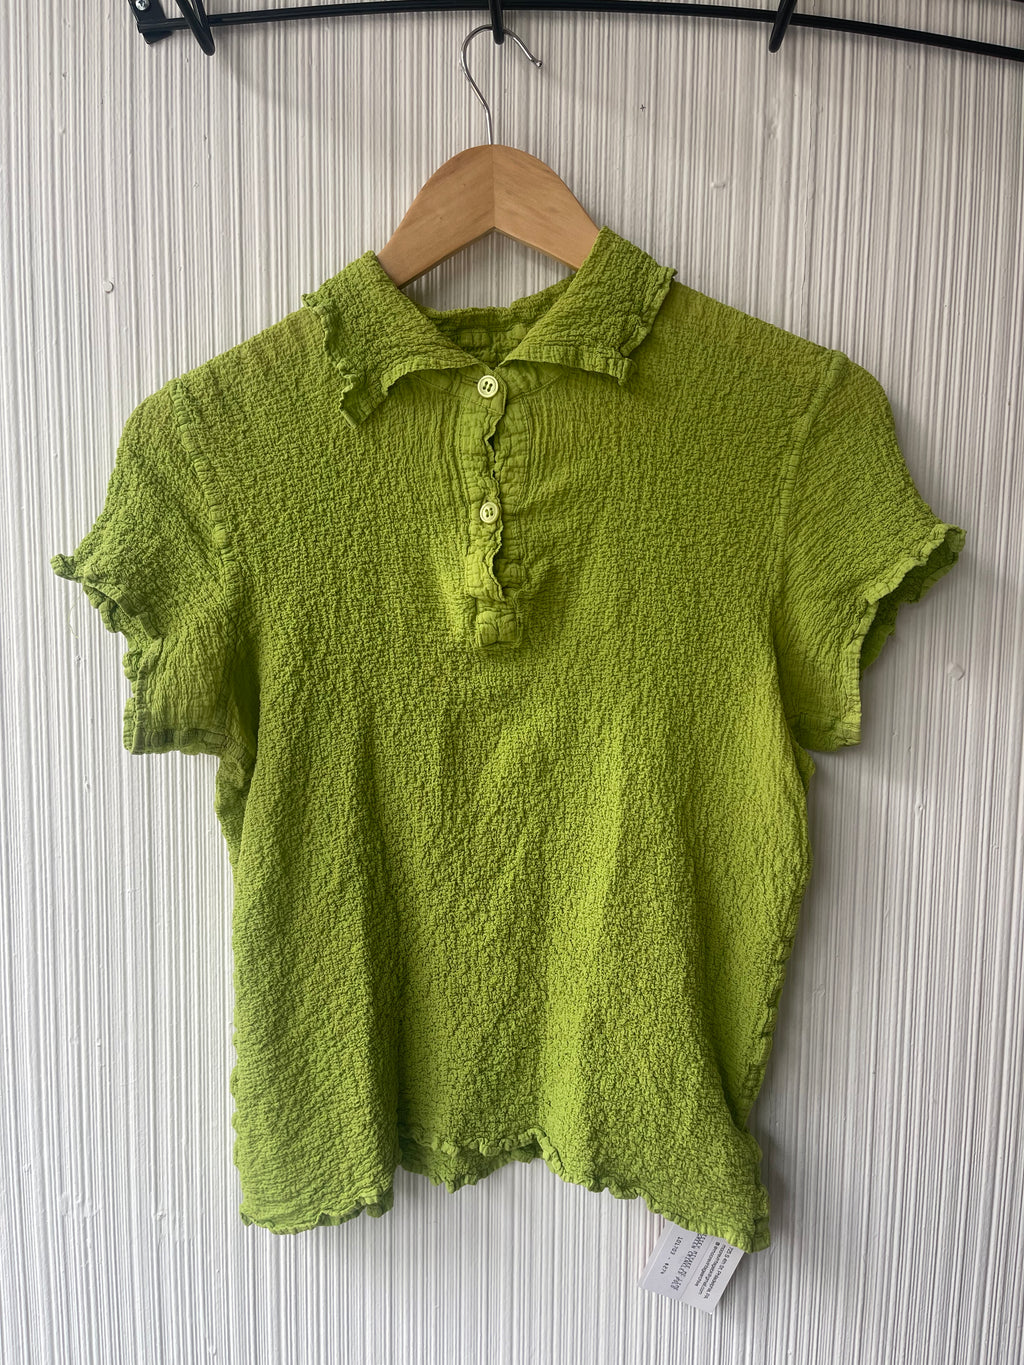 Issey Miyake ME lime green cotton blend crinkly top